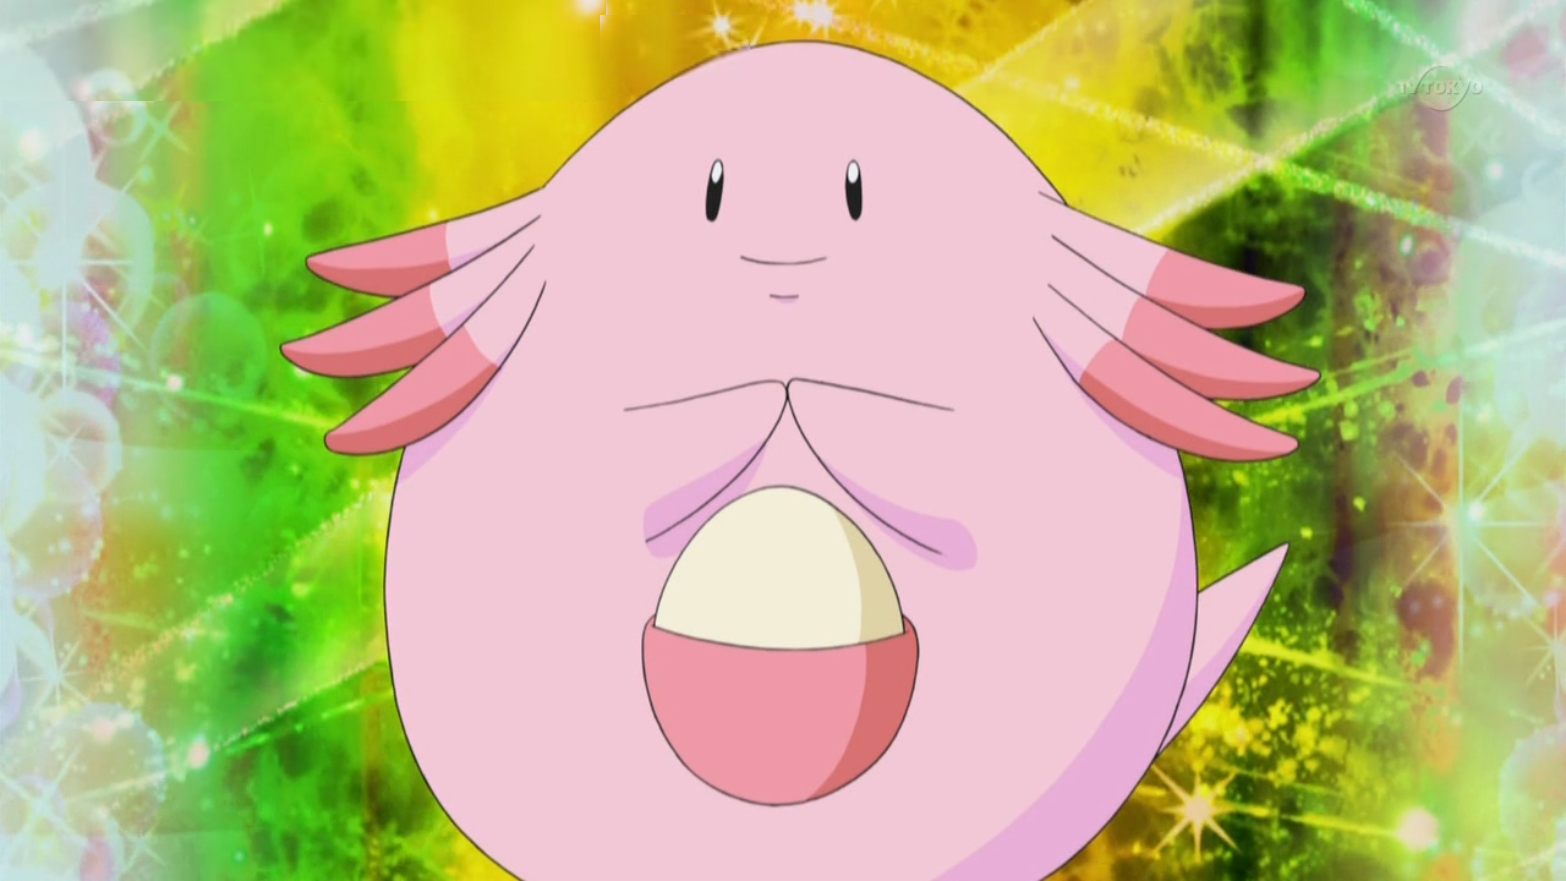 http://vignette4.wikia.nocookie.net/pokemon/images/8/83/Brock_Chansey.png/revision/